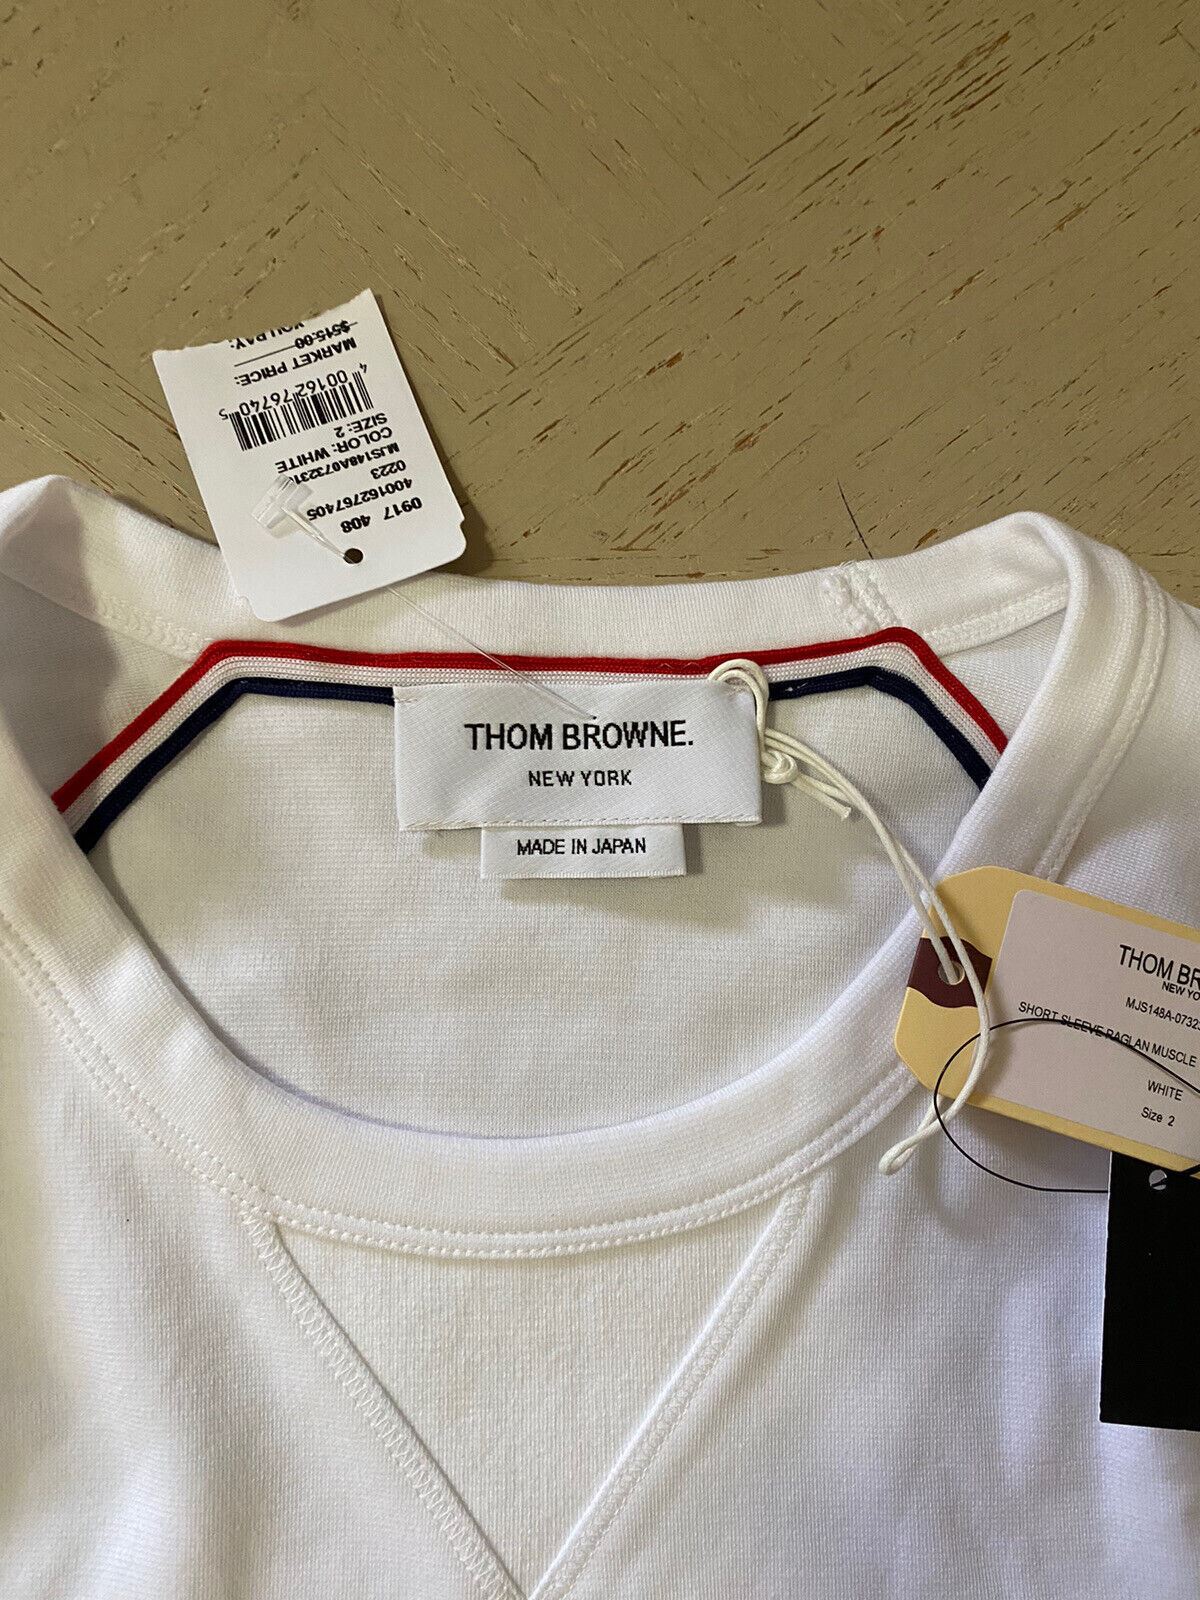 New $550 Thom Browne Solid-Hued T-Shirt White Size 2 ( M ) Japan